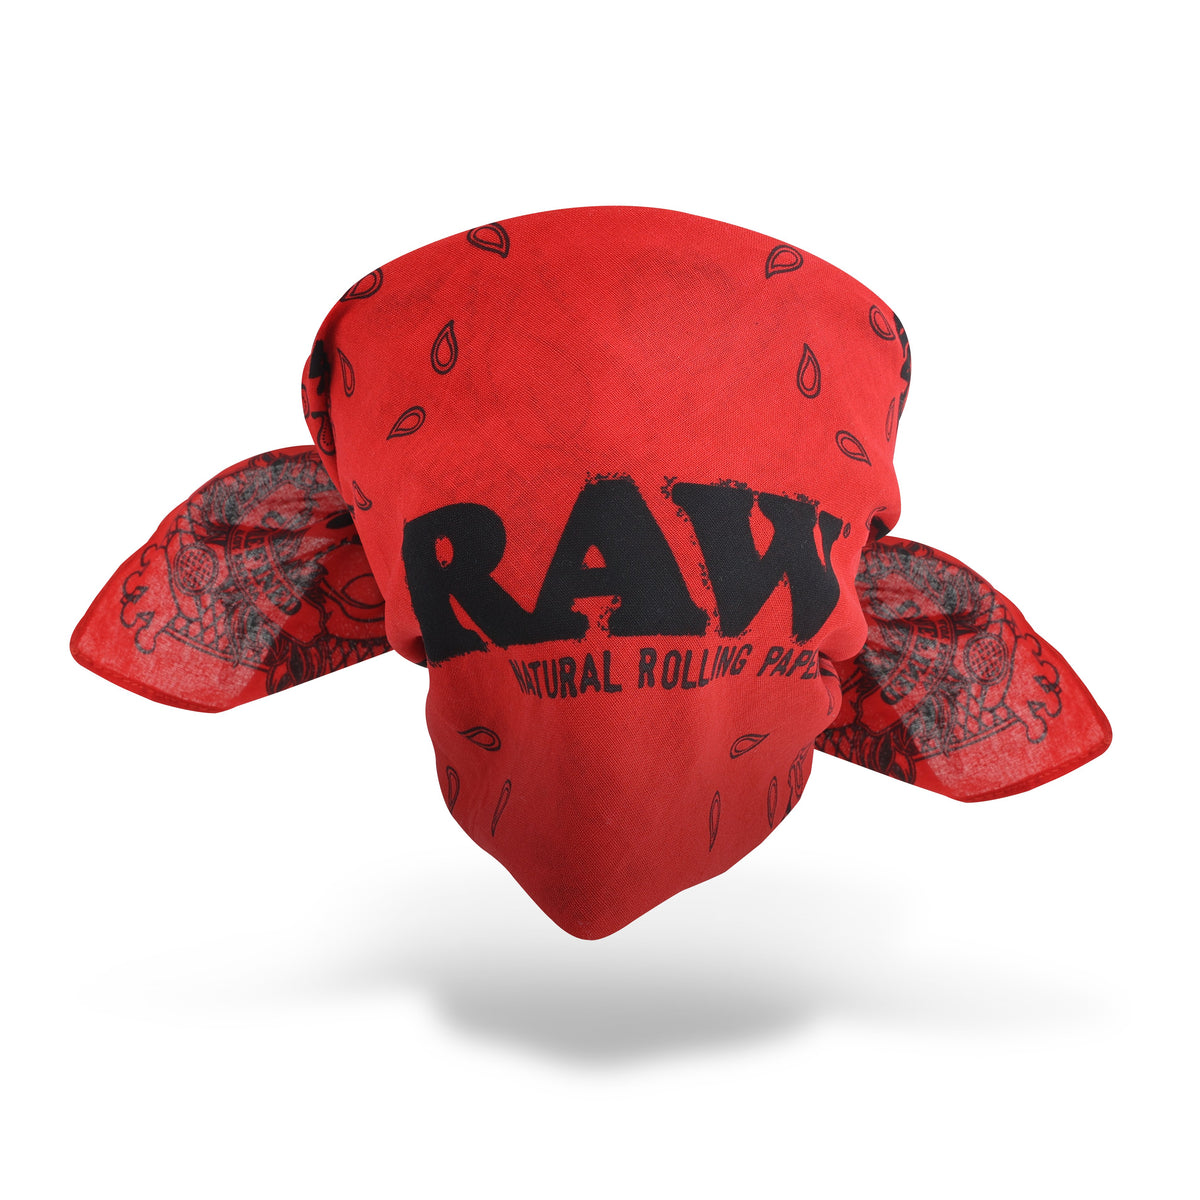 RAW Bandana Clothing Accessories WAR00411-MUSA01 esd-official